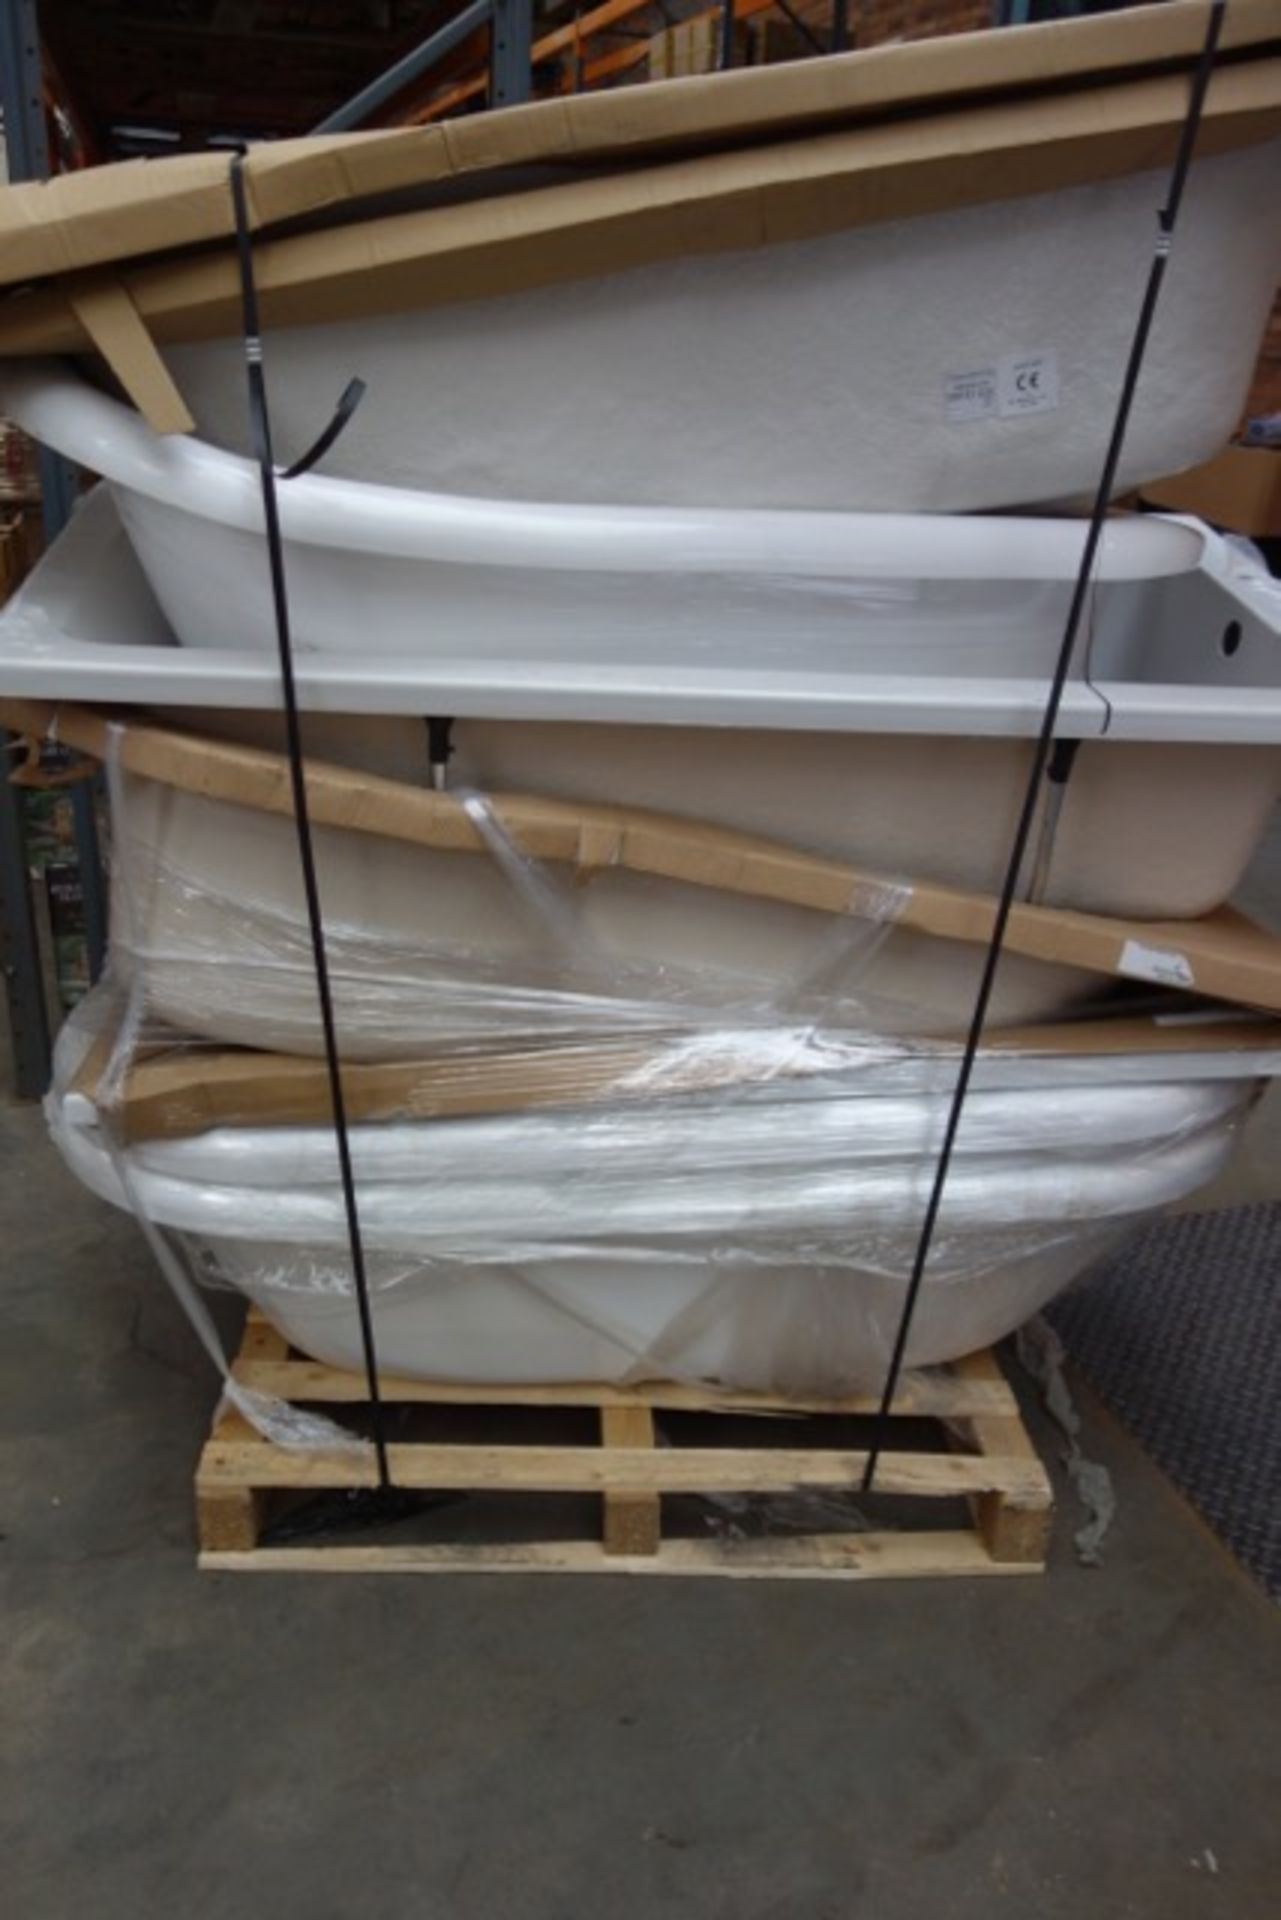 (1) PALLET TO CONTAIN 8 VARIOUS BATHS - IN VARIOUS SIZES & STYLES. RRP IN EXCESS OF £1,500.